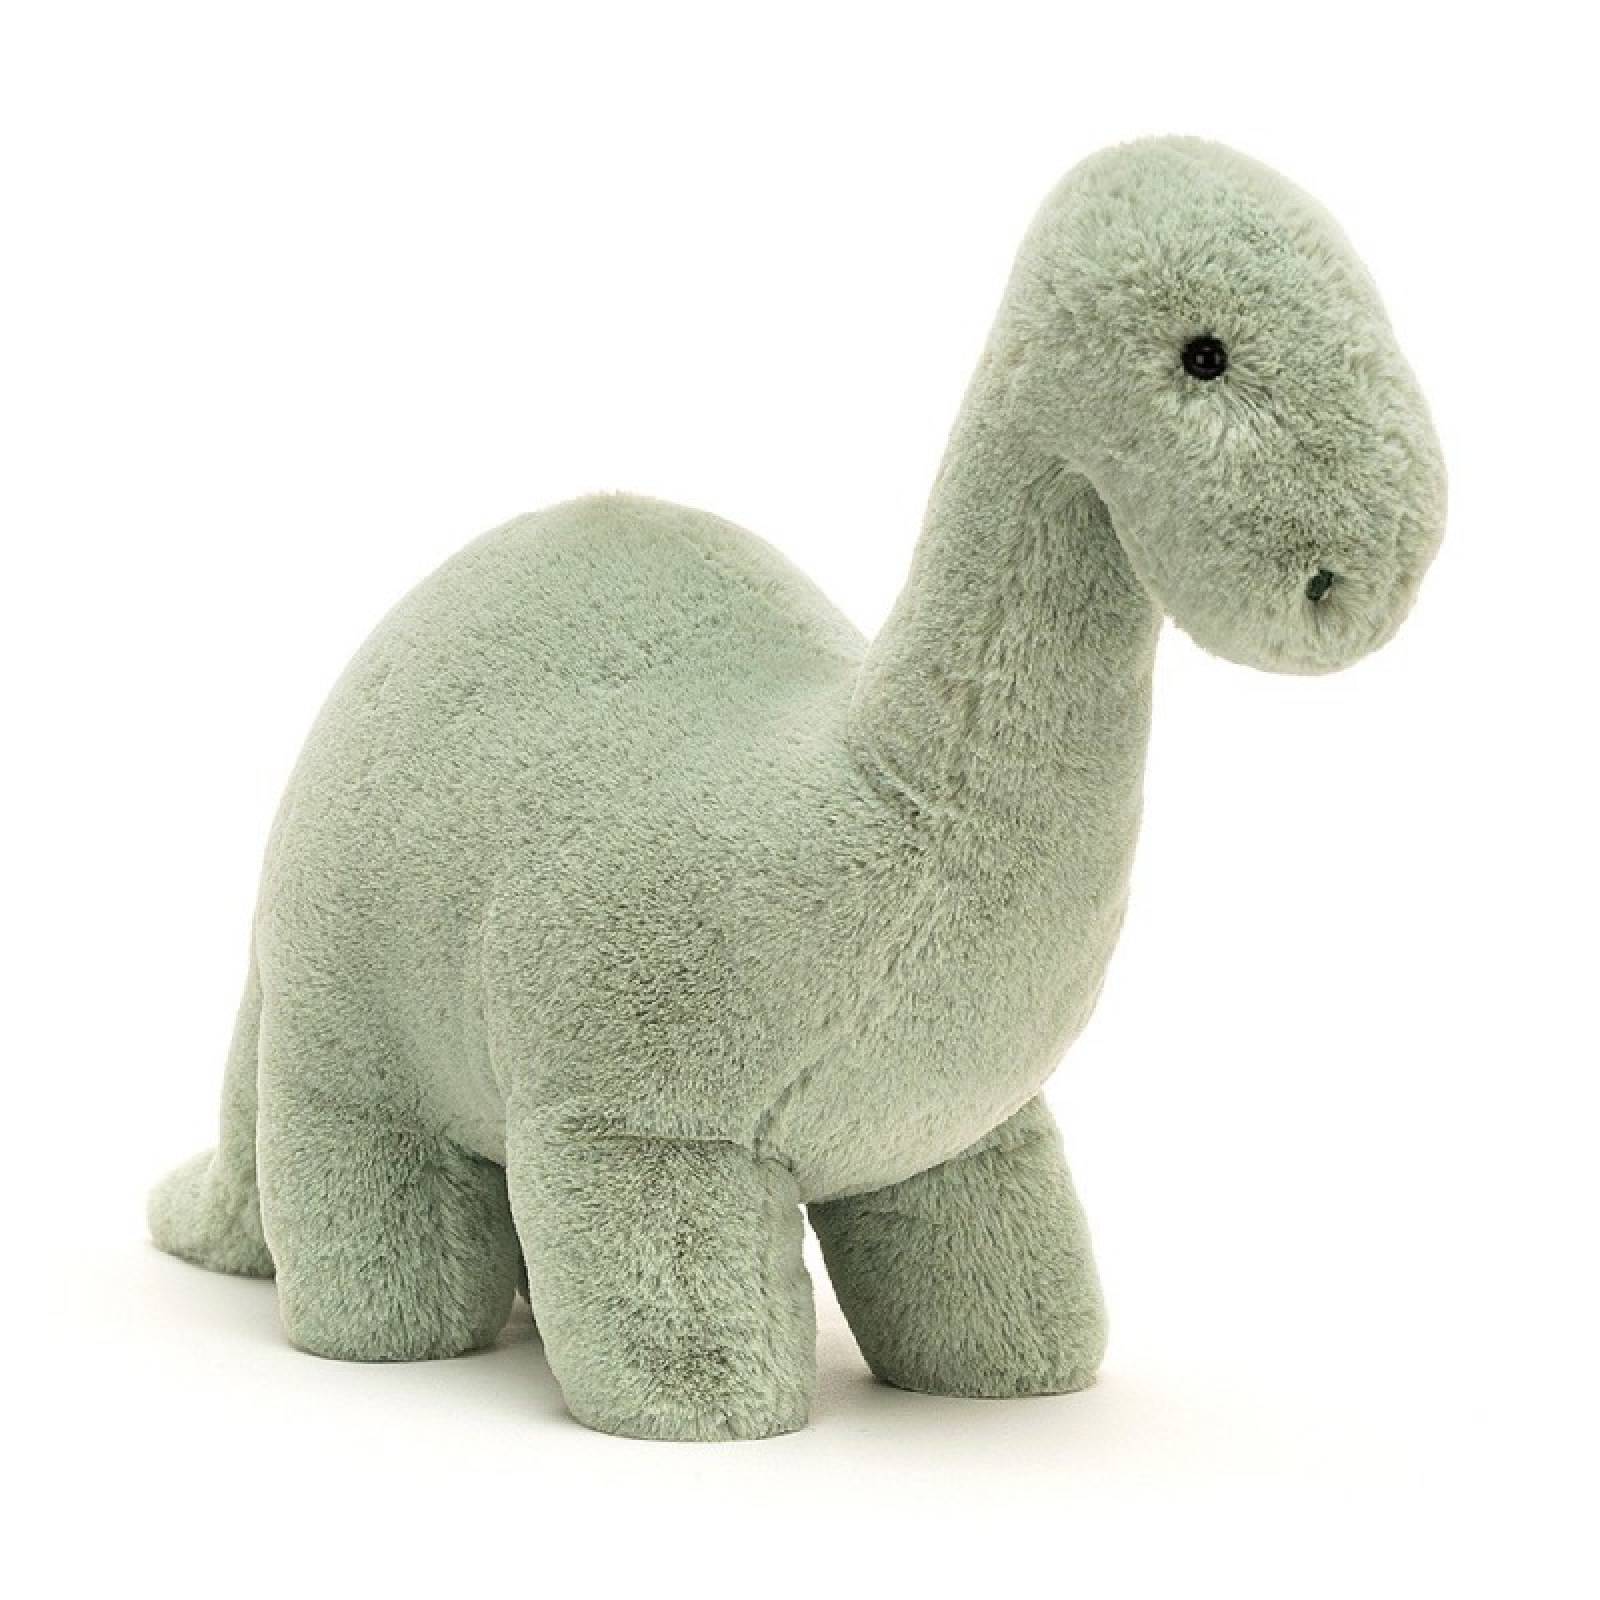 Fossilly Brontosaurus Dinosaur Soft Toy By Jellycat thumbnails